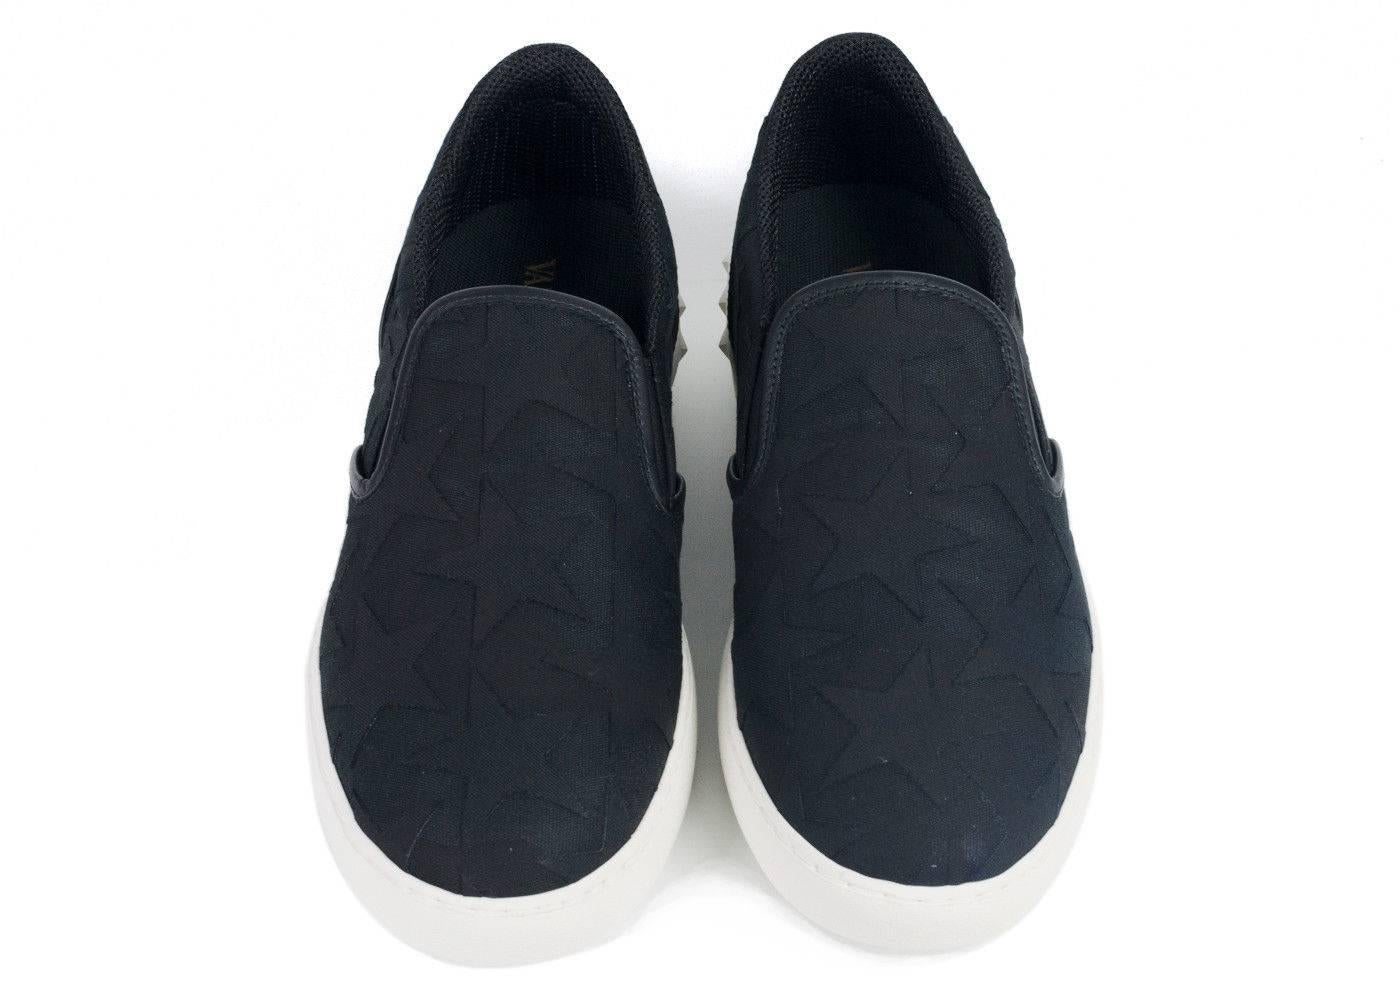 Brand New Valentino Rockstud Slip On Sneakers
Original Tags and Dust Bag Included
Retails in Stores & Online for $845
Men's Size EU 42.5/US 9.5 Fits true to size


The Valentino Rockstud sneakers are the ideal slip-ons. These canvas sneakers